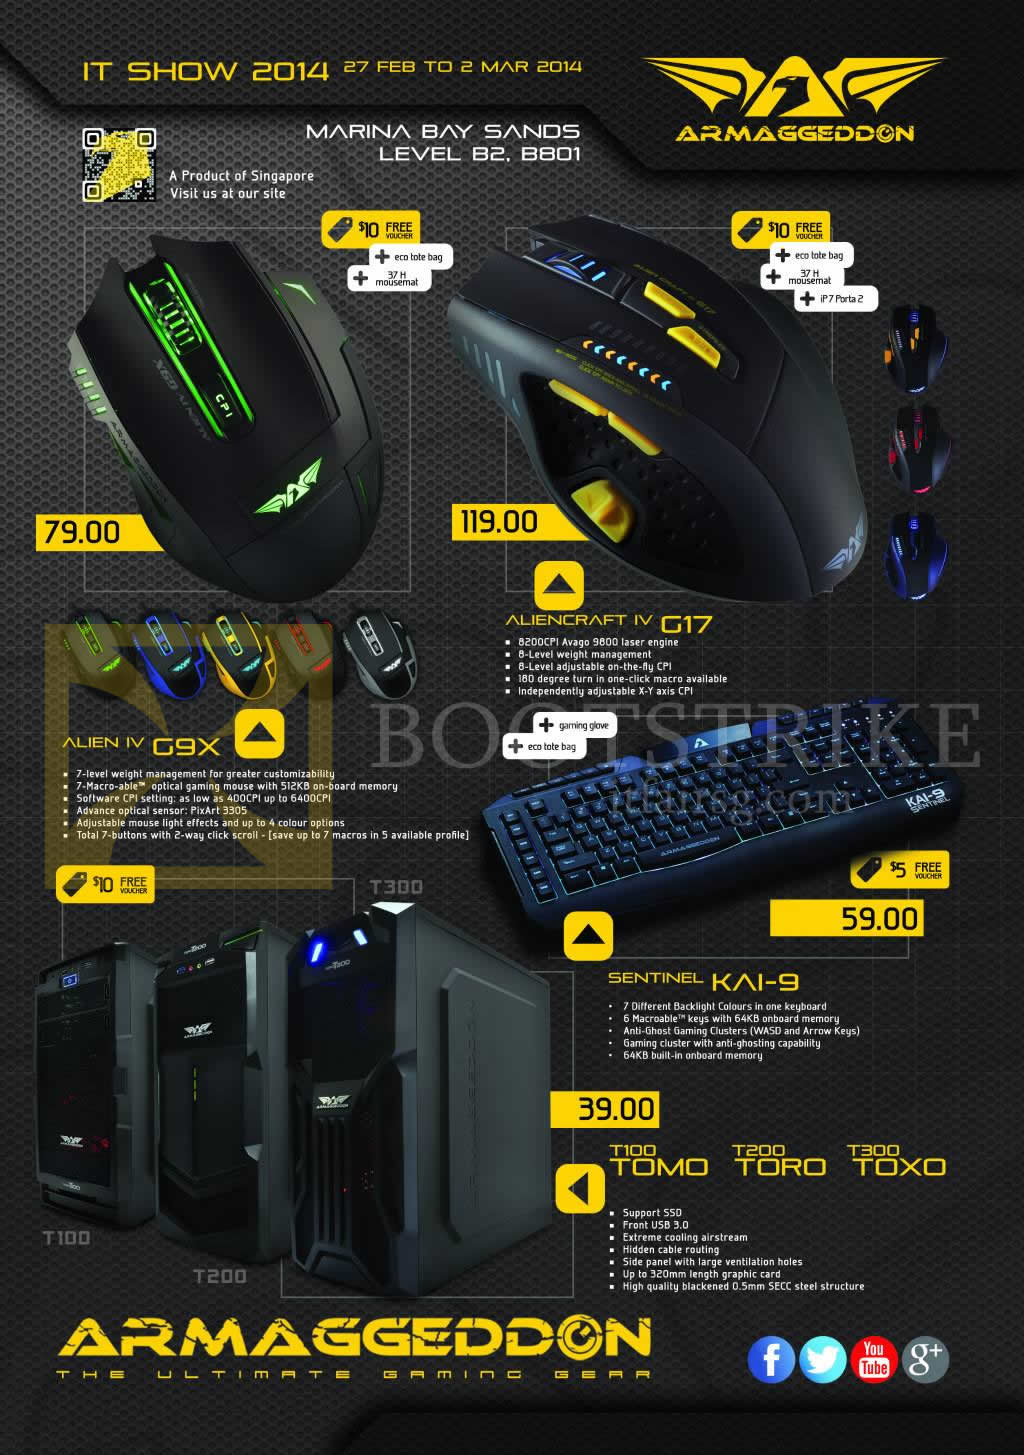 IT SHOW 2014 price list image brochure of Leap Frog Armaggeddon Mouse Alien IV G9X, Aliencraft IV G17, Sentinel Kai-9 Keyboard, Casing T100 Tomo, T200 Toro, T300 Toxo